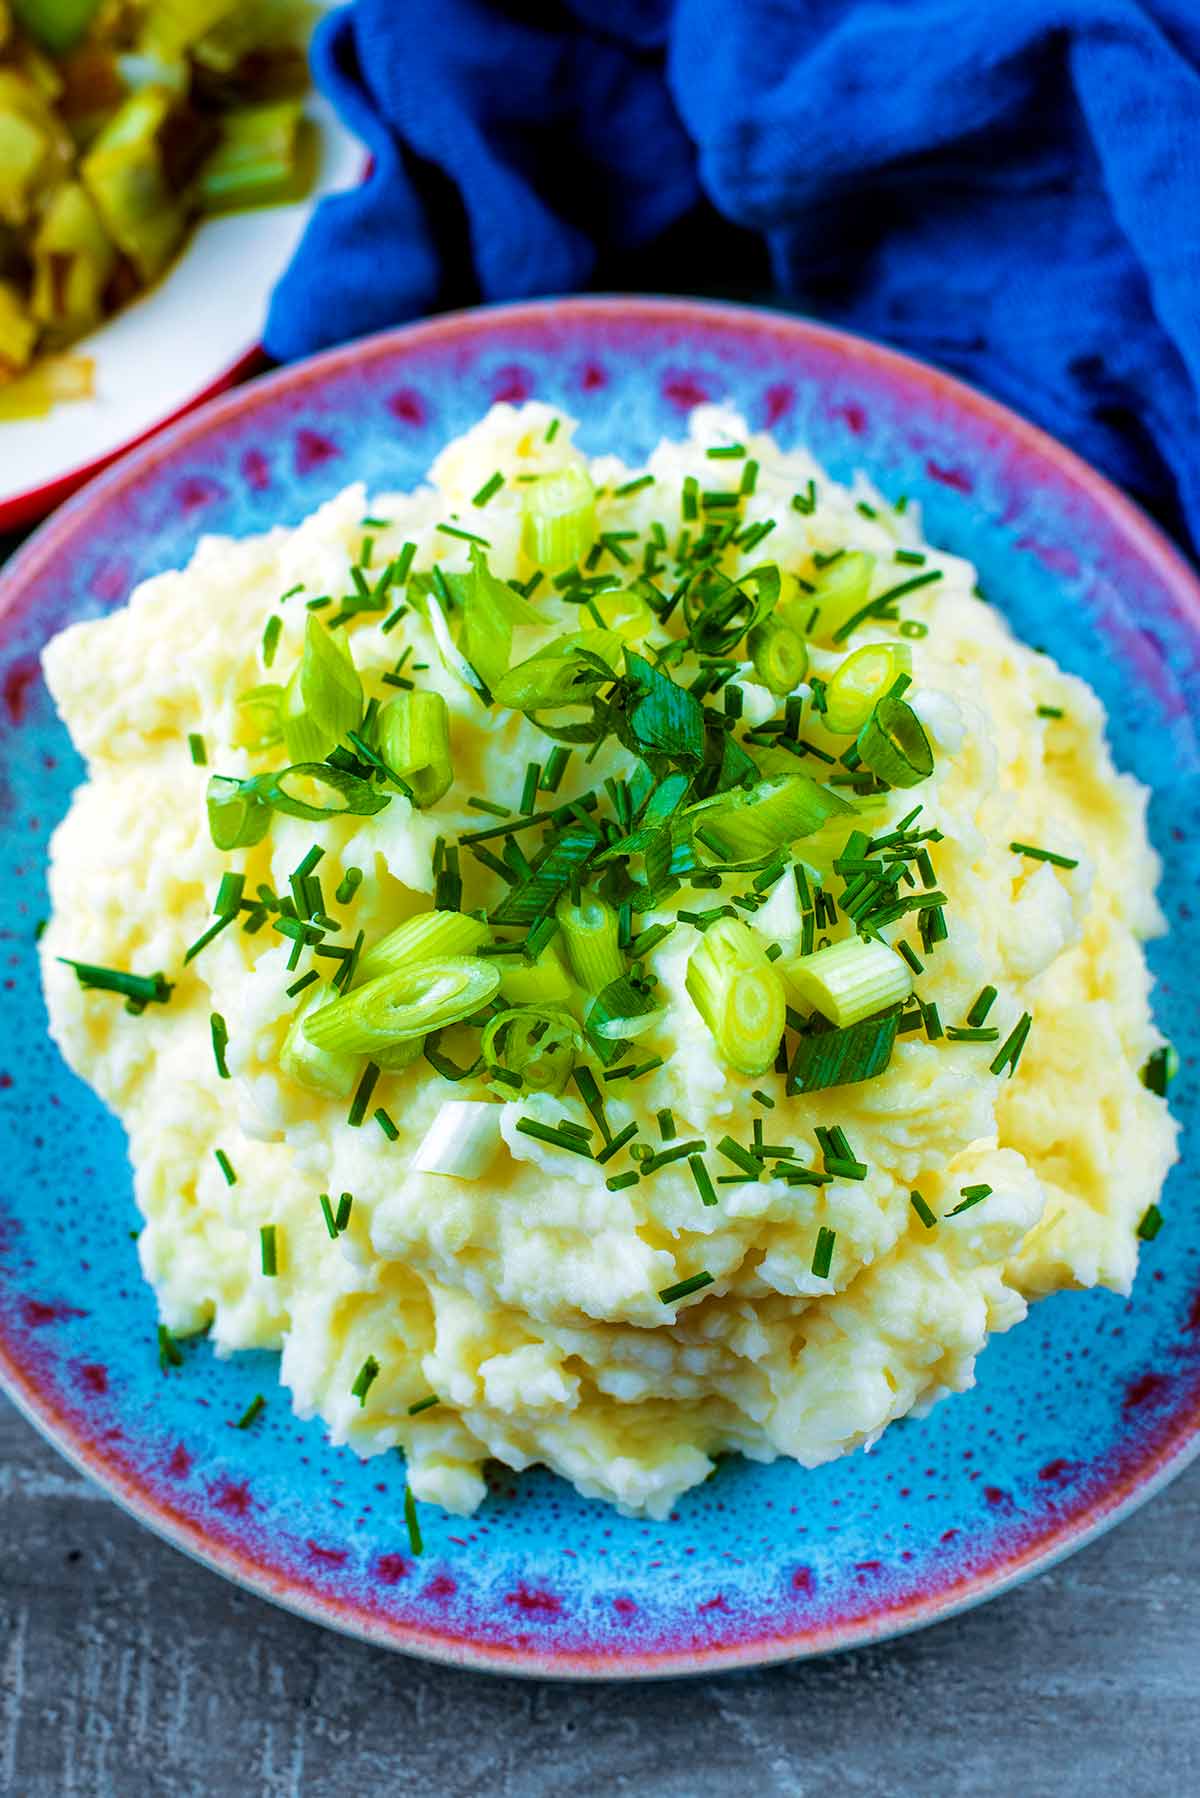 Mashed potatoes on a blue plate topped with sliced spring onions.